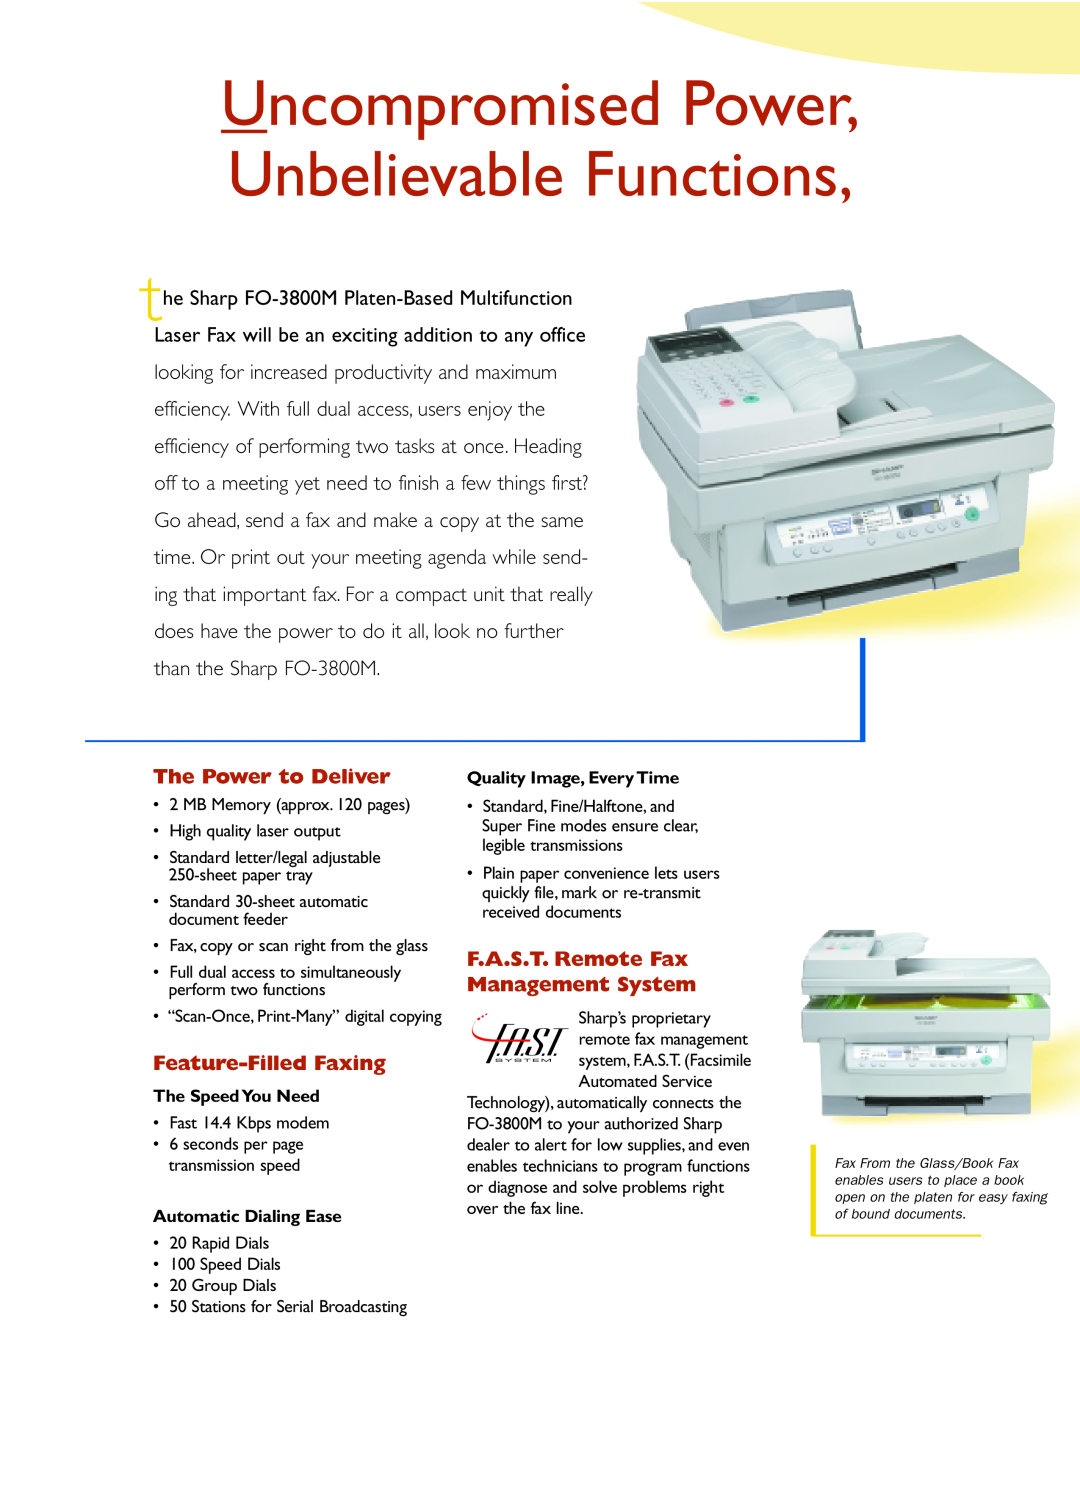 Sharp FO-3800M manual The Power to Deliver, Feature-Filled Faxing, F.A.S.T. Remote Fax Management System 